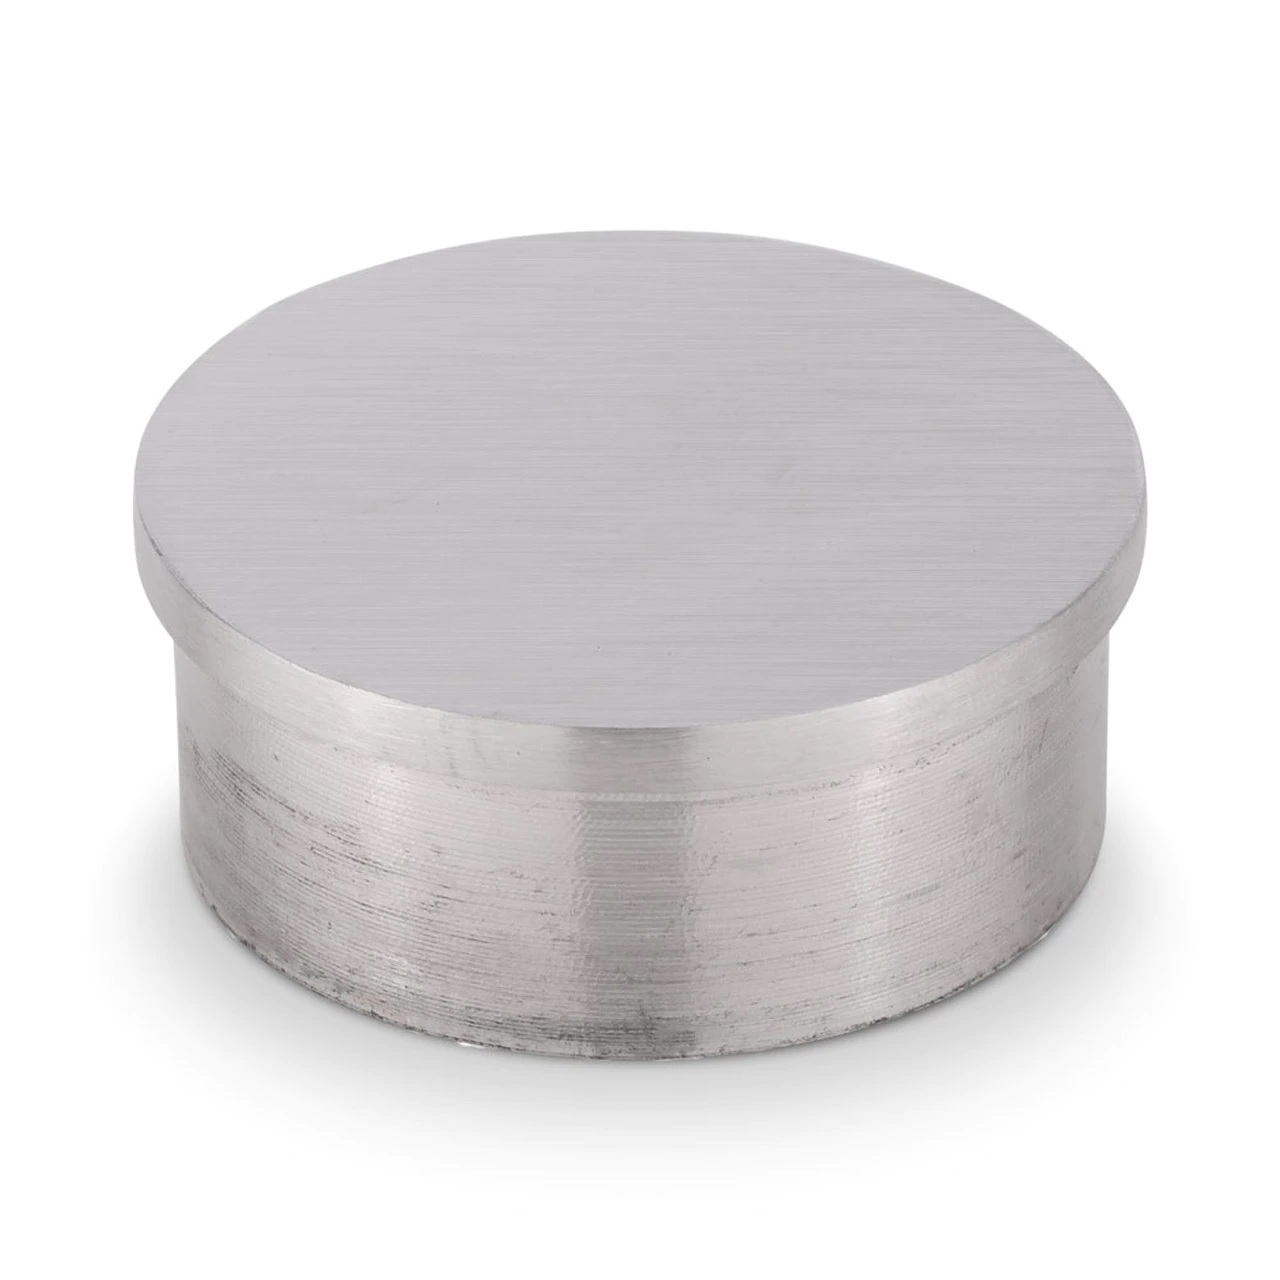 BRUSHED STAINLESS STEEL FLUSH FLAT END CAP